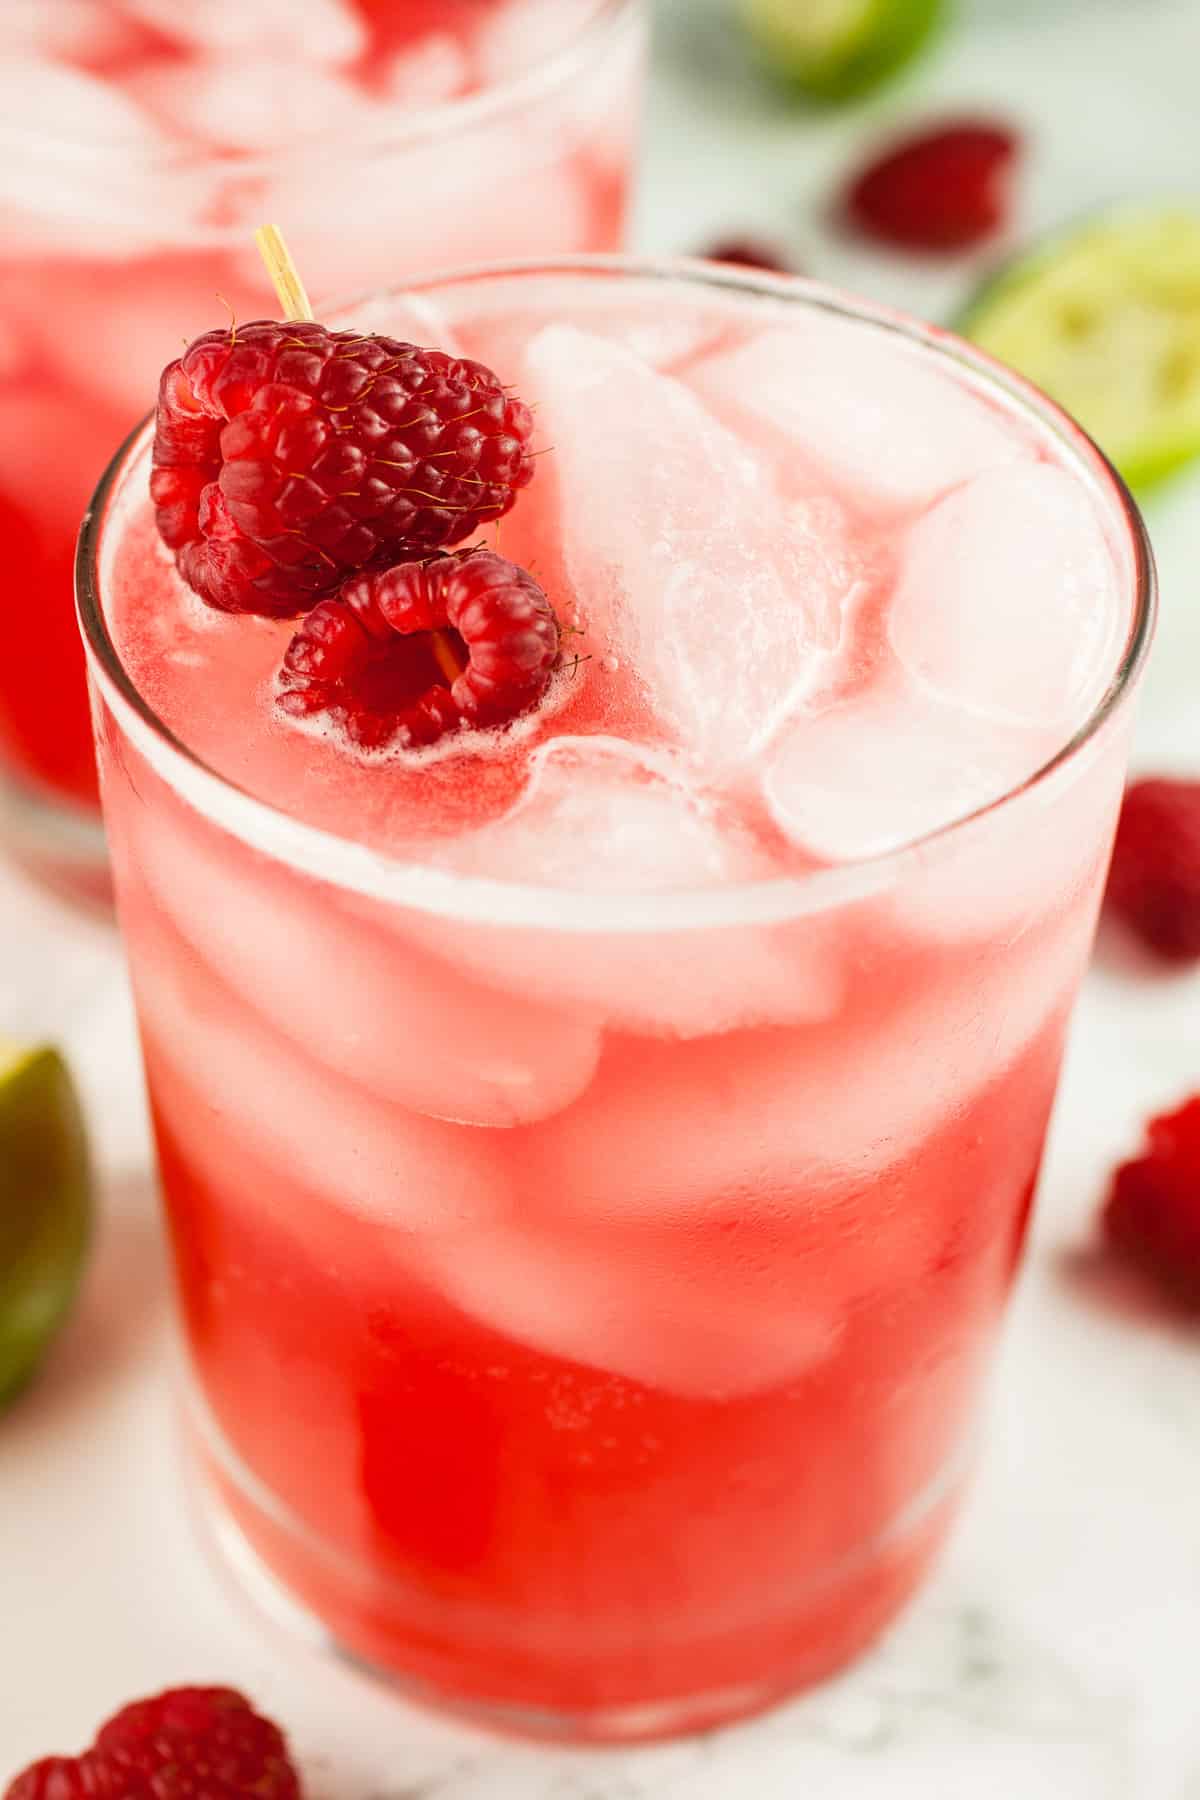 Raspberry mule cocktail in glass with fresh raspberries.